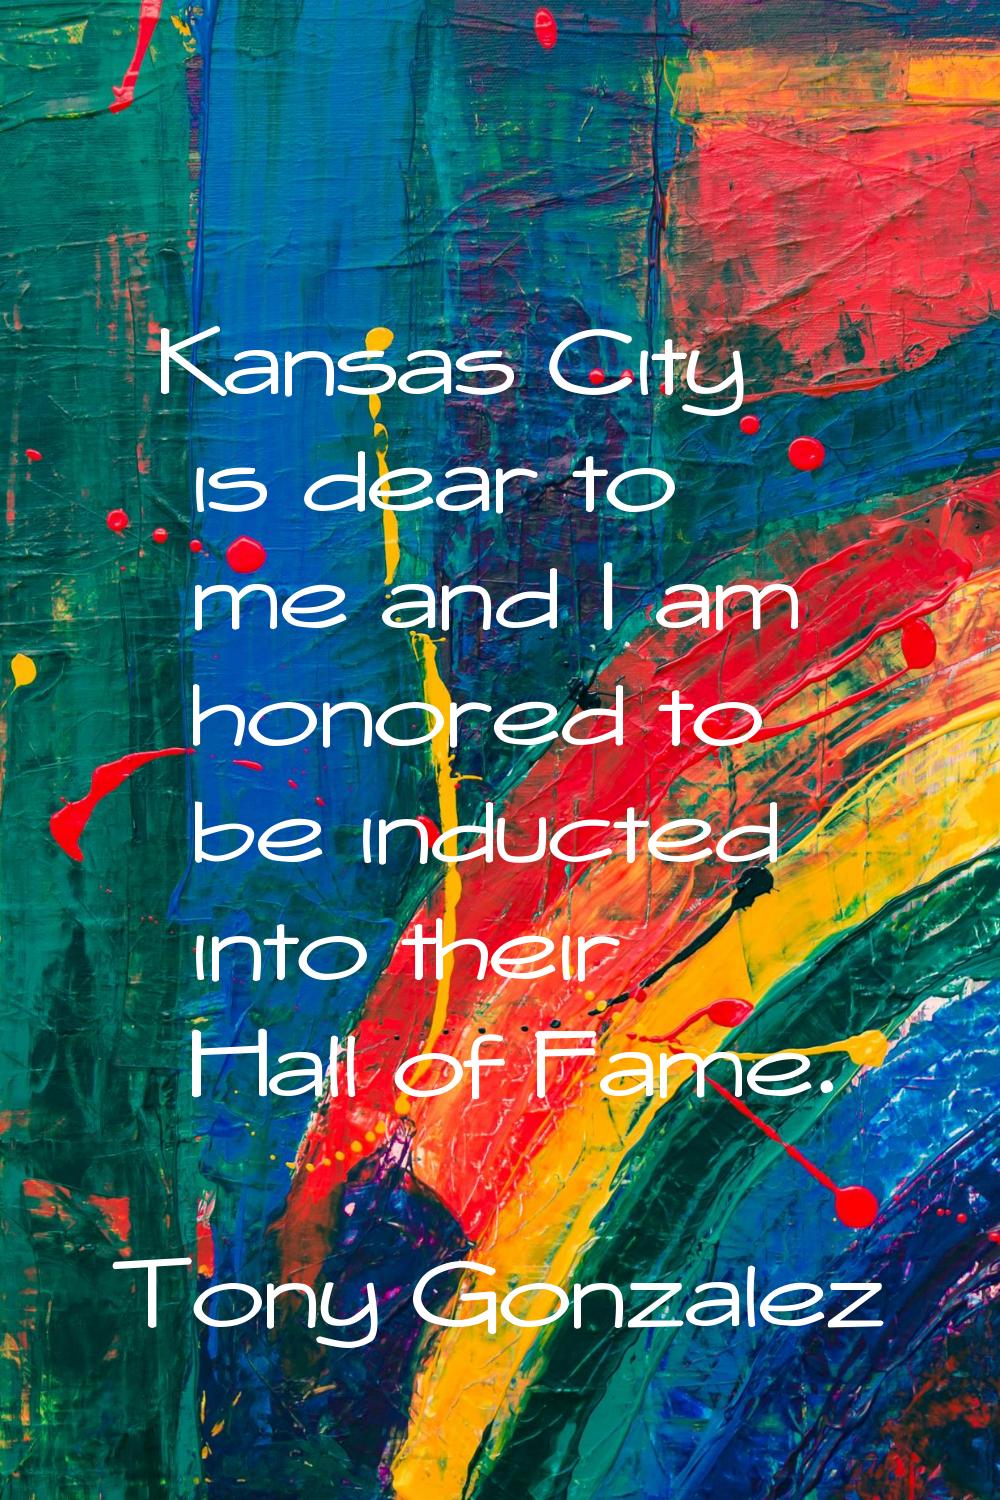 Kansas City is dear to me and I am honored to be inducted into their Hall of Fame.